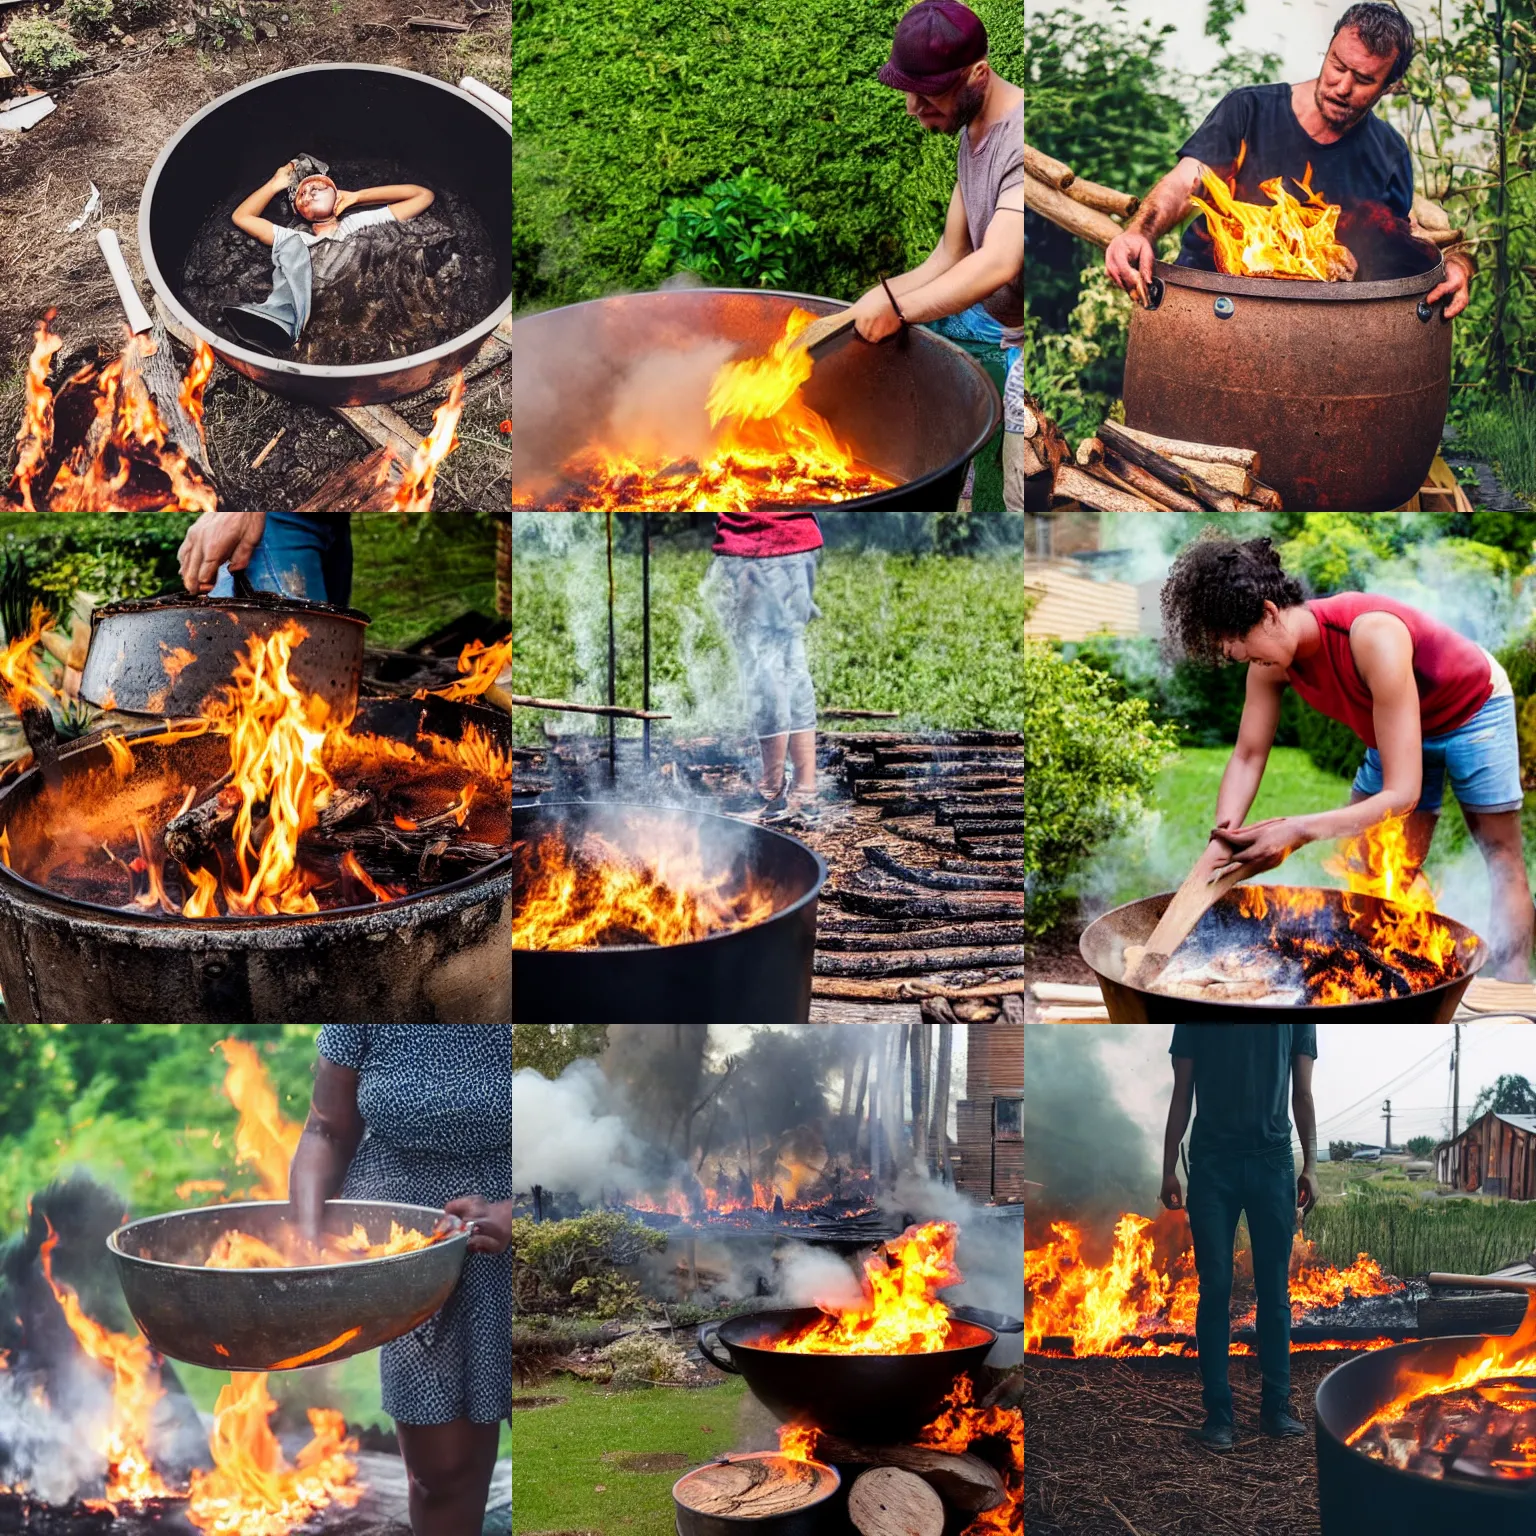 Prompt: Photo of a person half immersed in a very large cooking pot laid on burning wood in front of a garden.